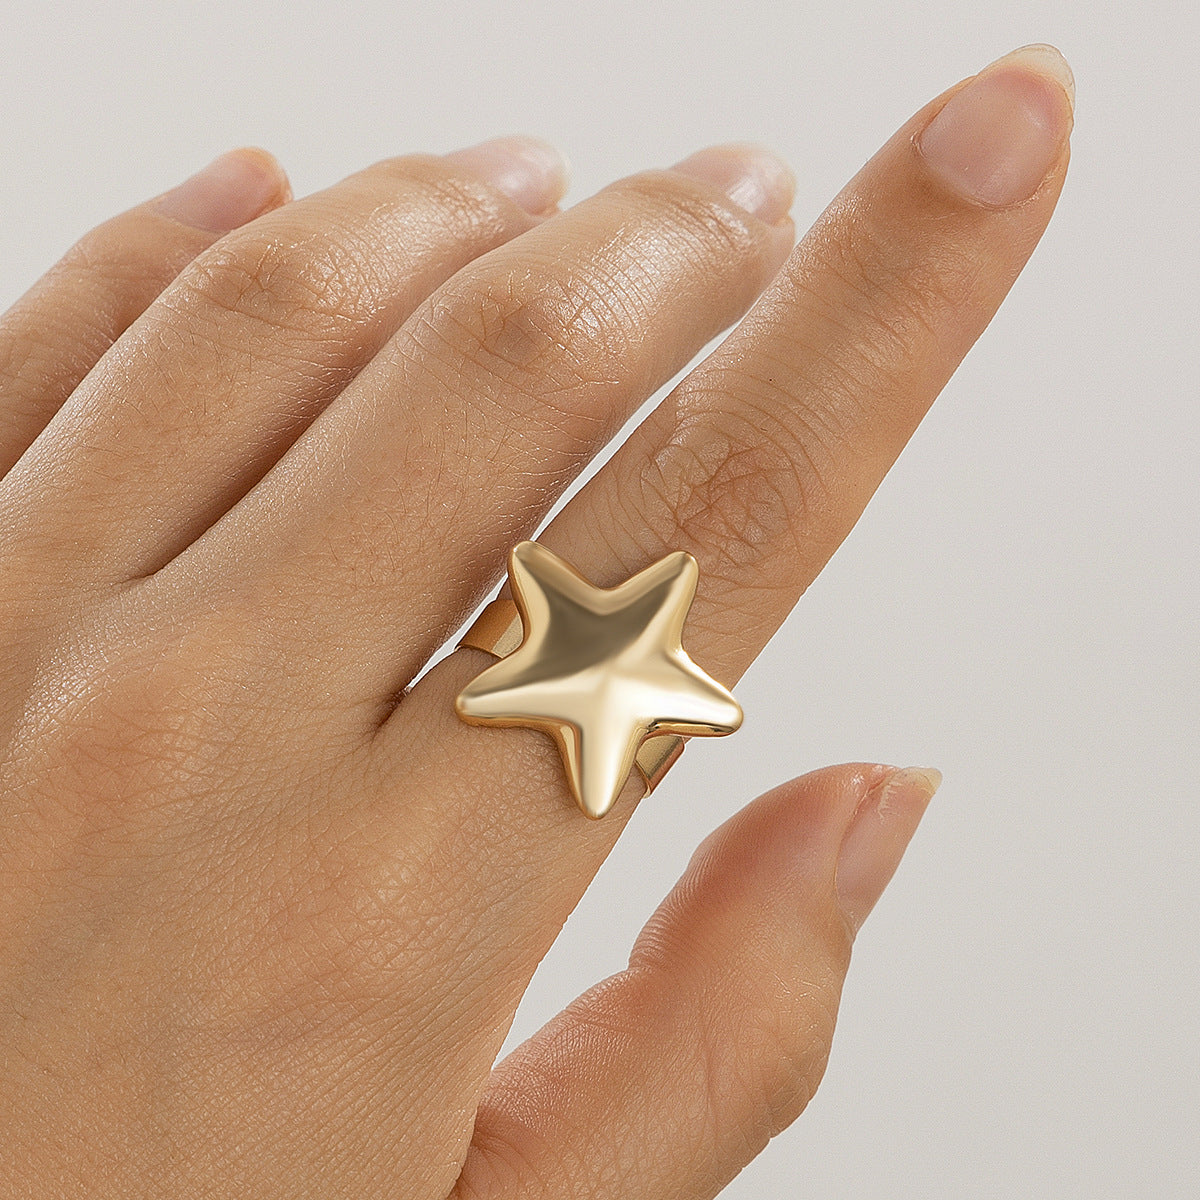 Niche Three-dimensional Star Ring Opening